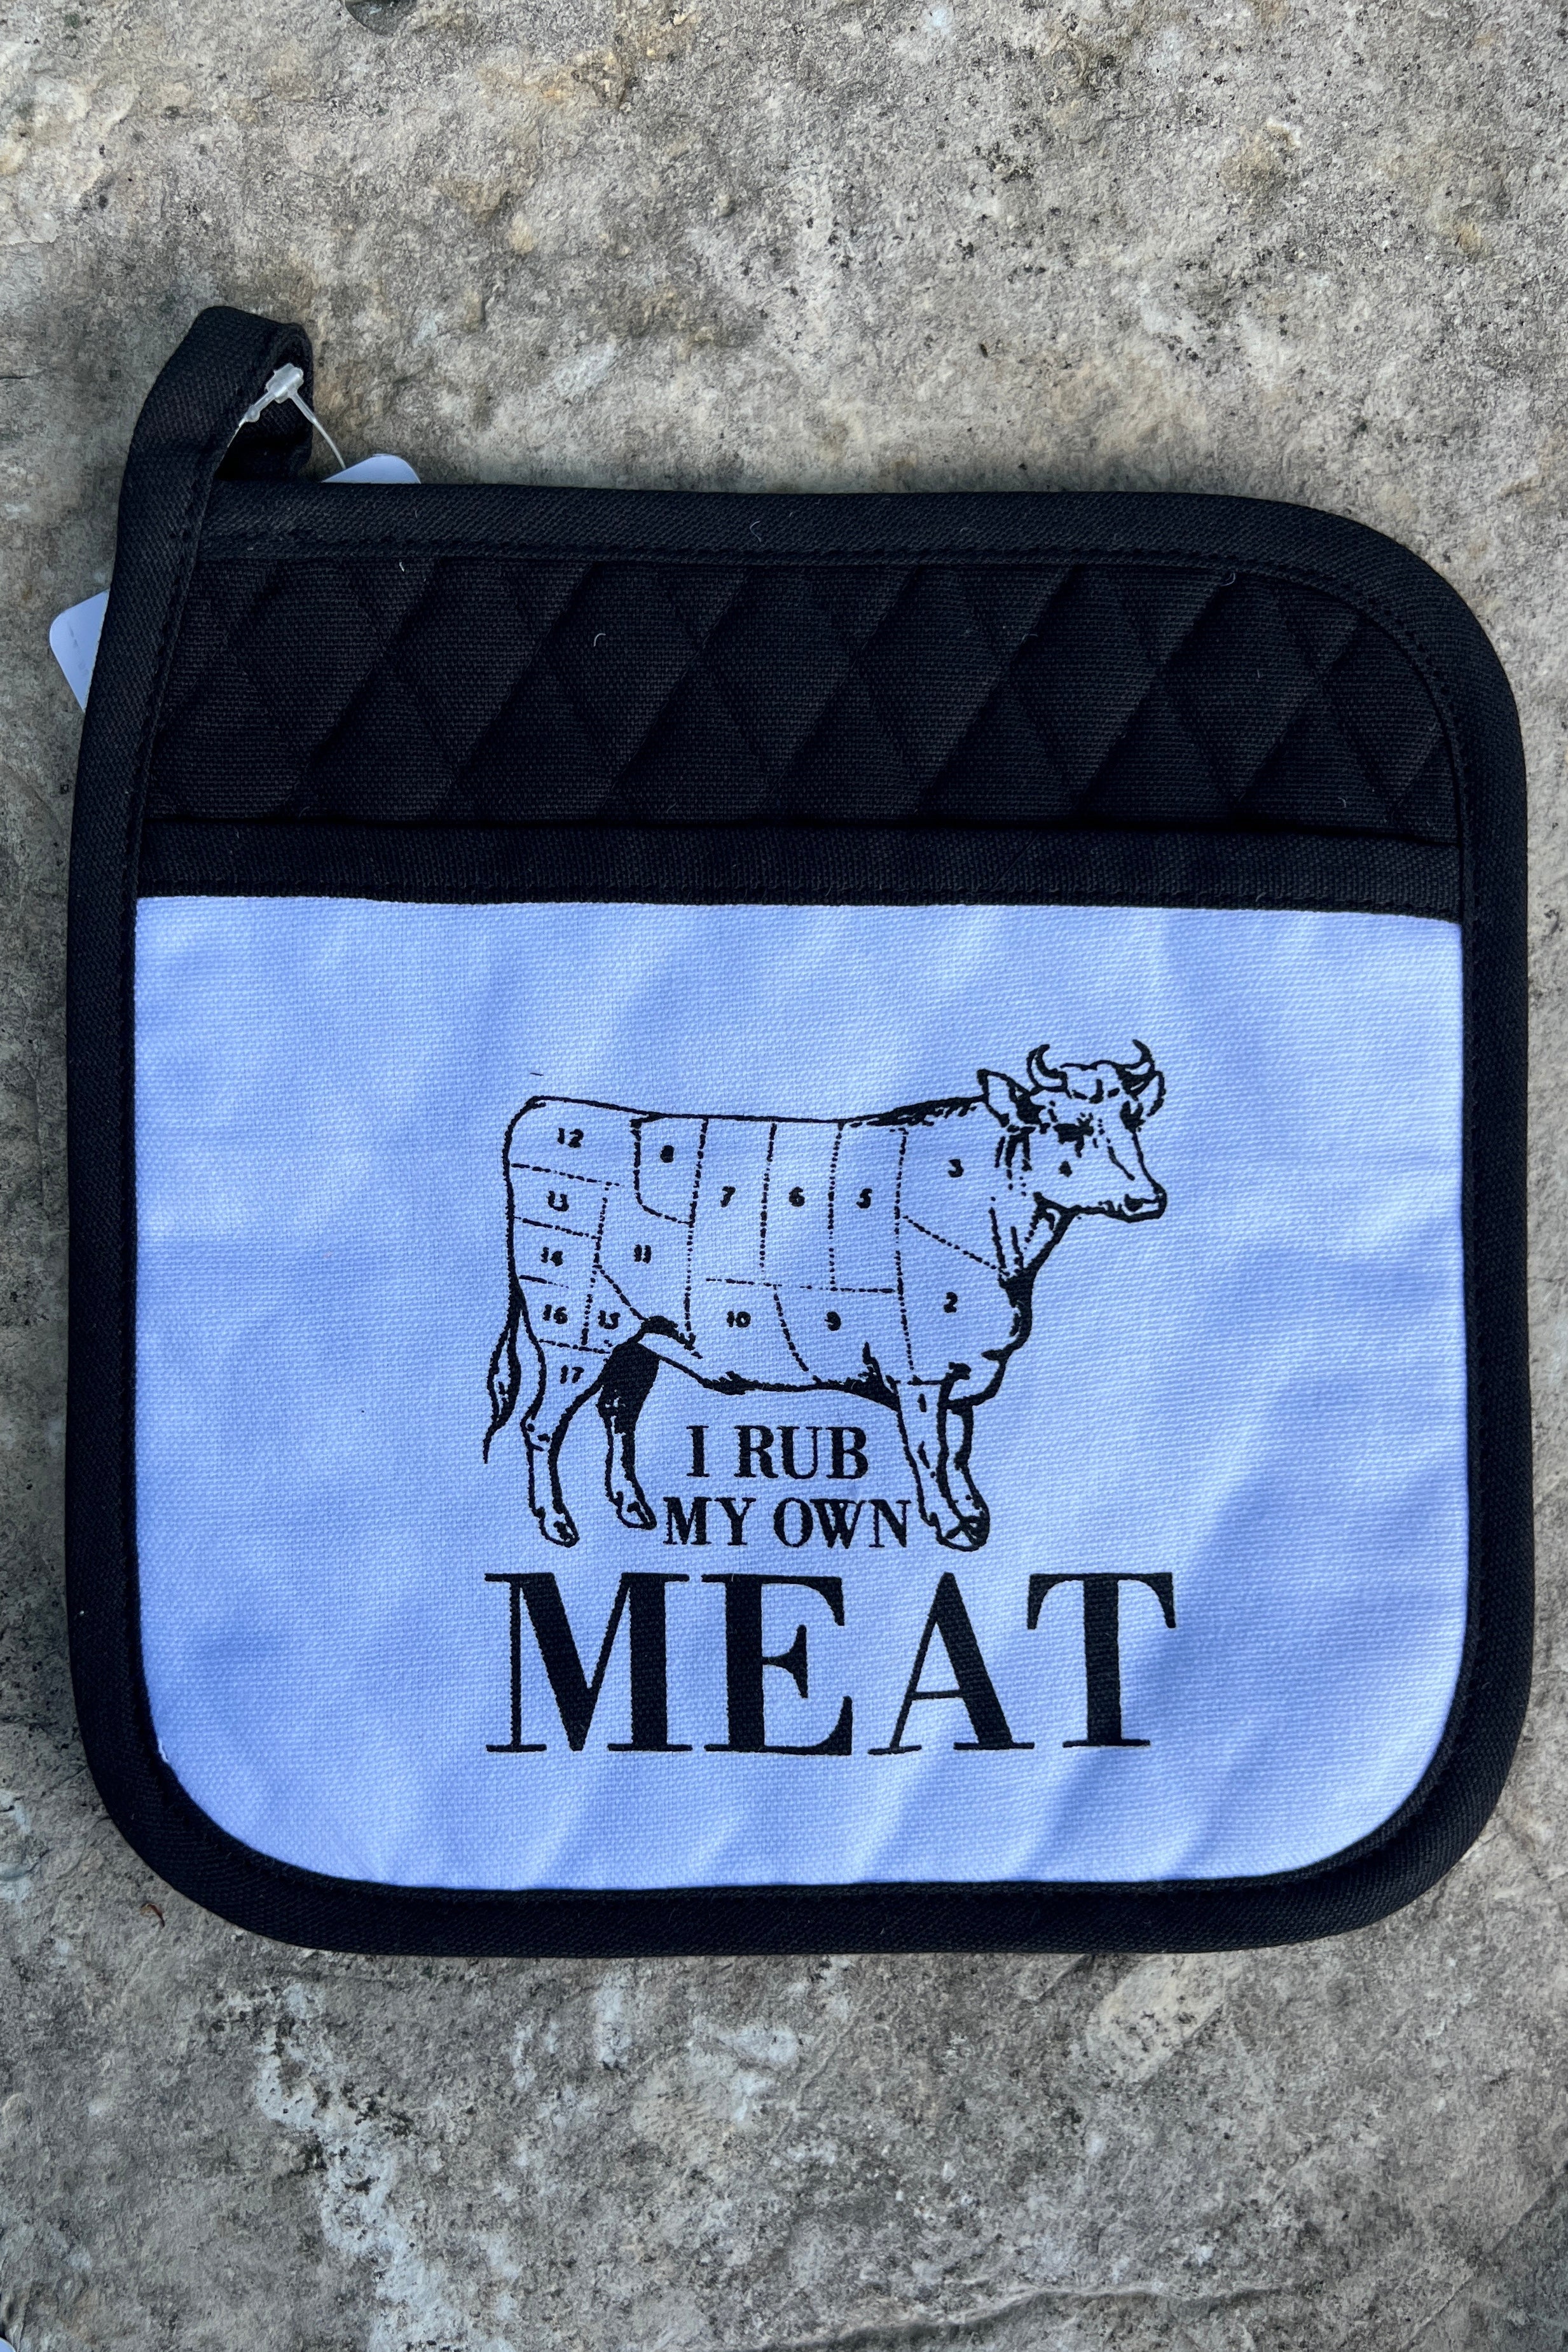 Funny Potholder Kitchen Gifts Cute Meat Oven Mitt Funny Cotton